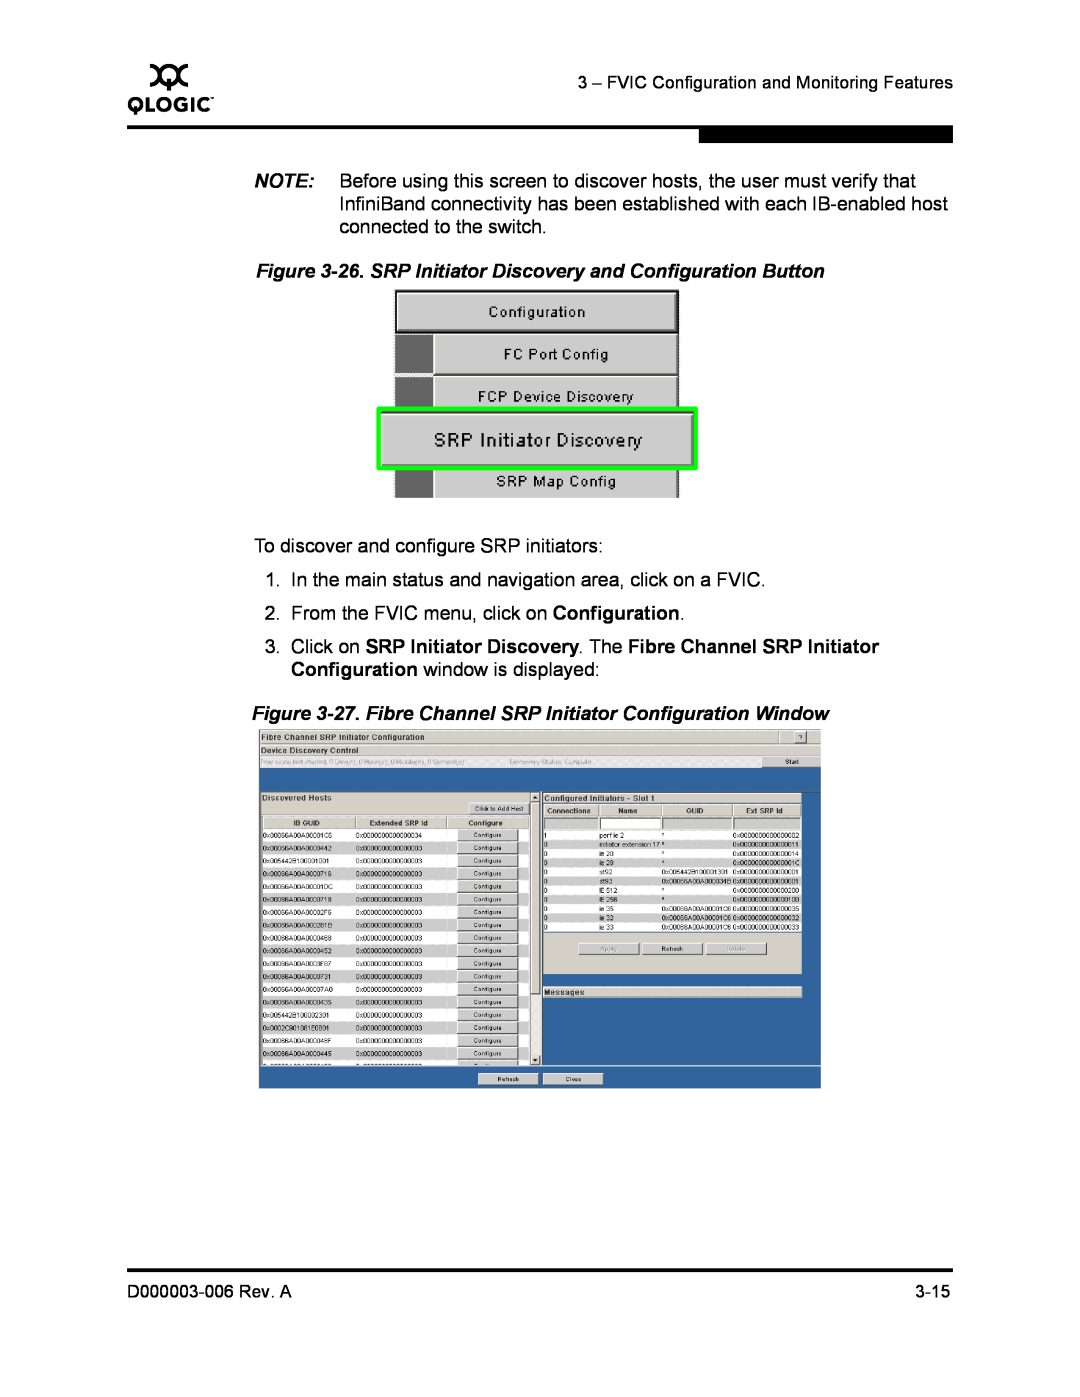 Q-Logic 9000 26. SRP Initiator Discovery and Configuration Button, 27. Fibre Channel SRP Initiator Configuration Window 